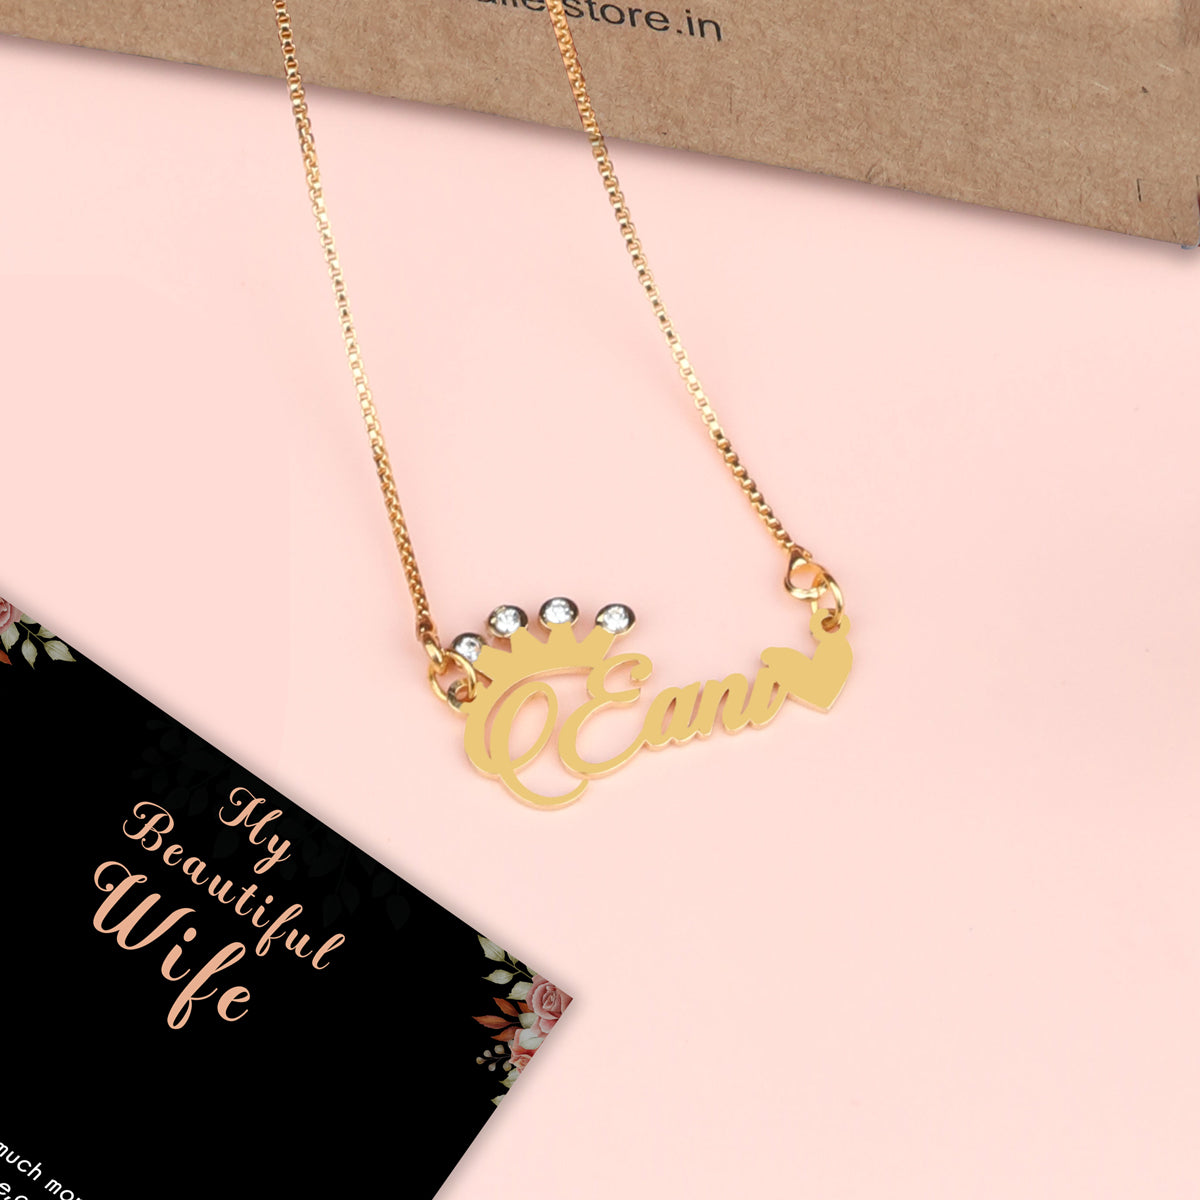 Name With Crystal Studded Crown Necklace